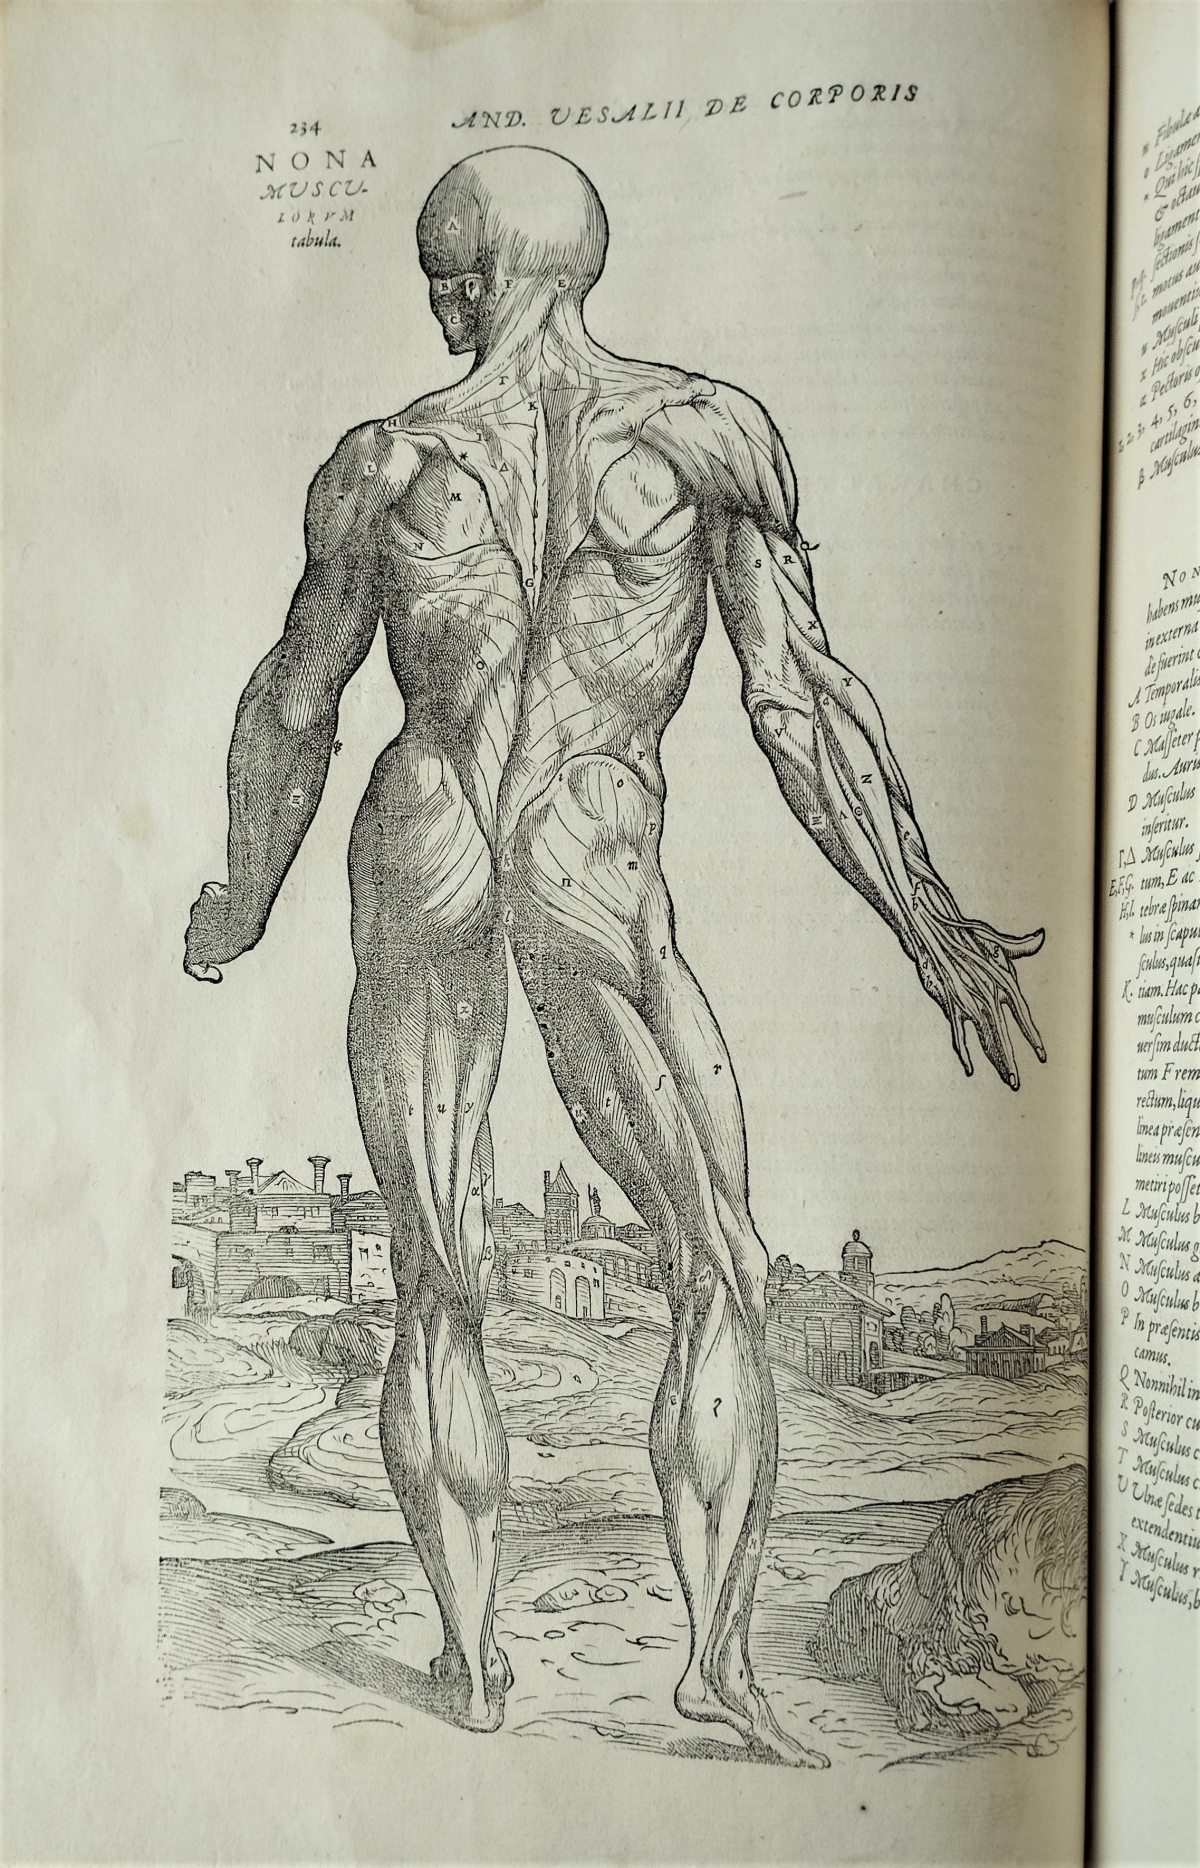 Illustration of a standing human figure without skin from the back. Muscle groups annotated with letters. Countryside view in the background.